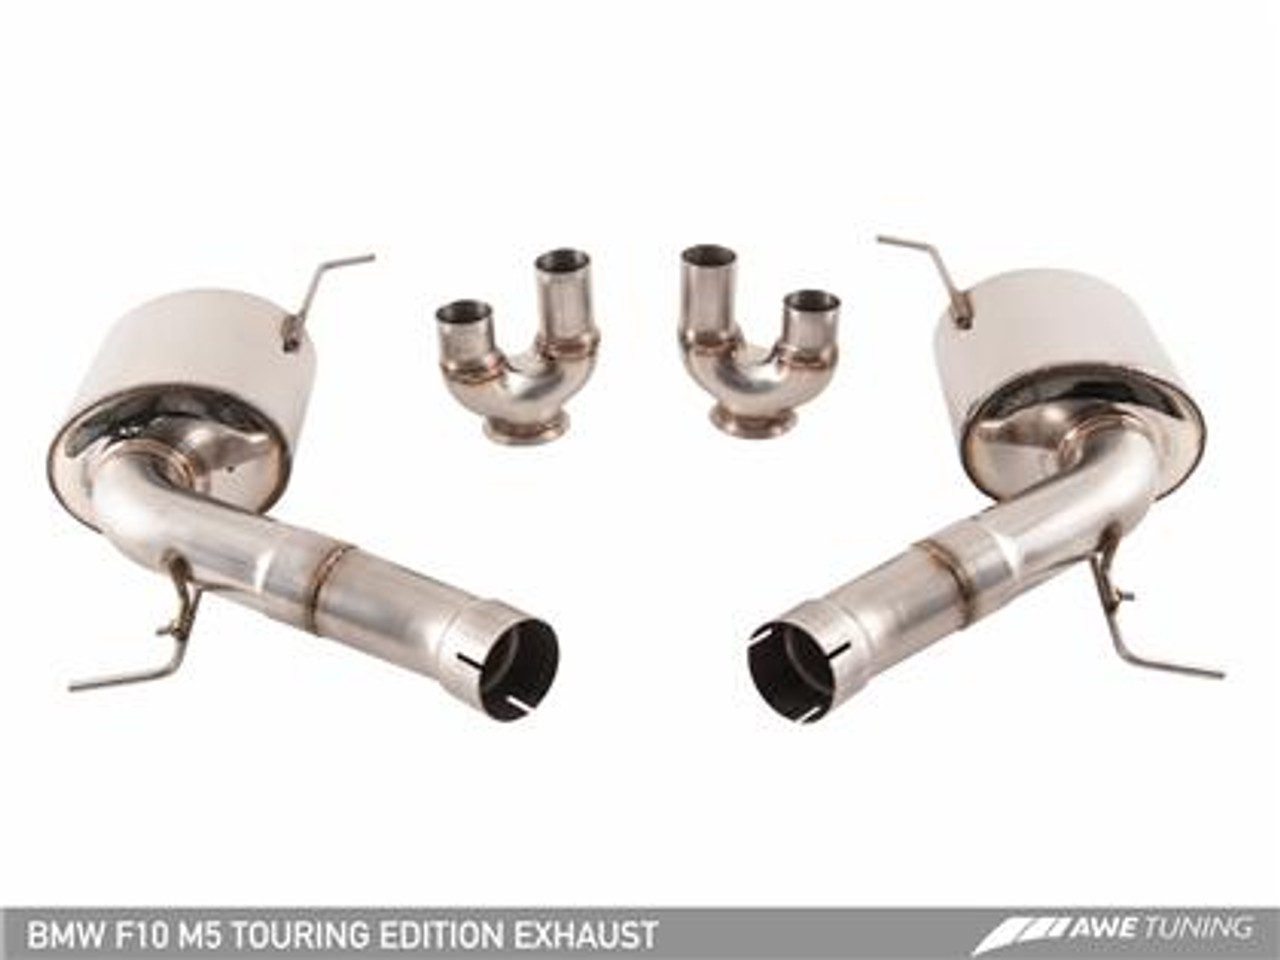 BMW Touring Edition Axle Back Exhaust with Diamond Black Tips - AWE Tuning 3015-43066